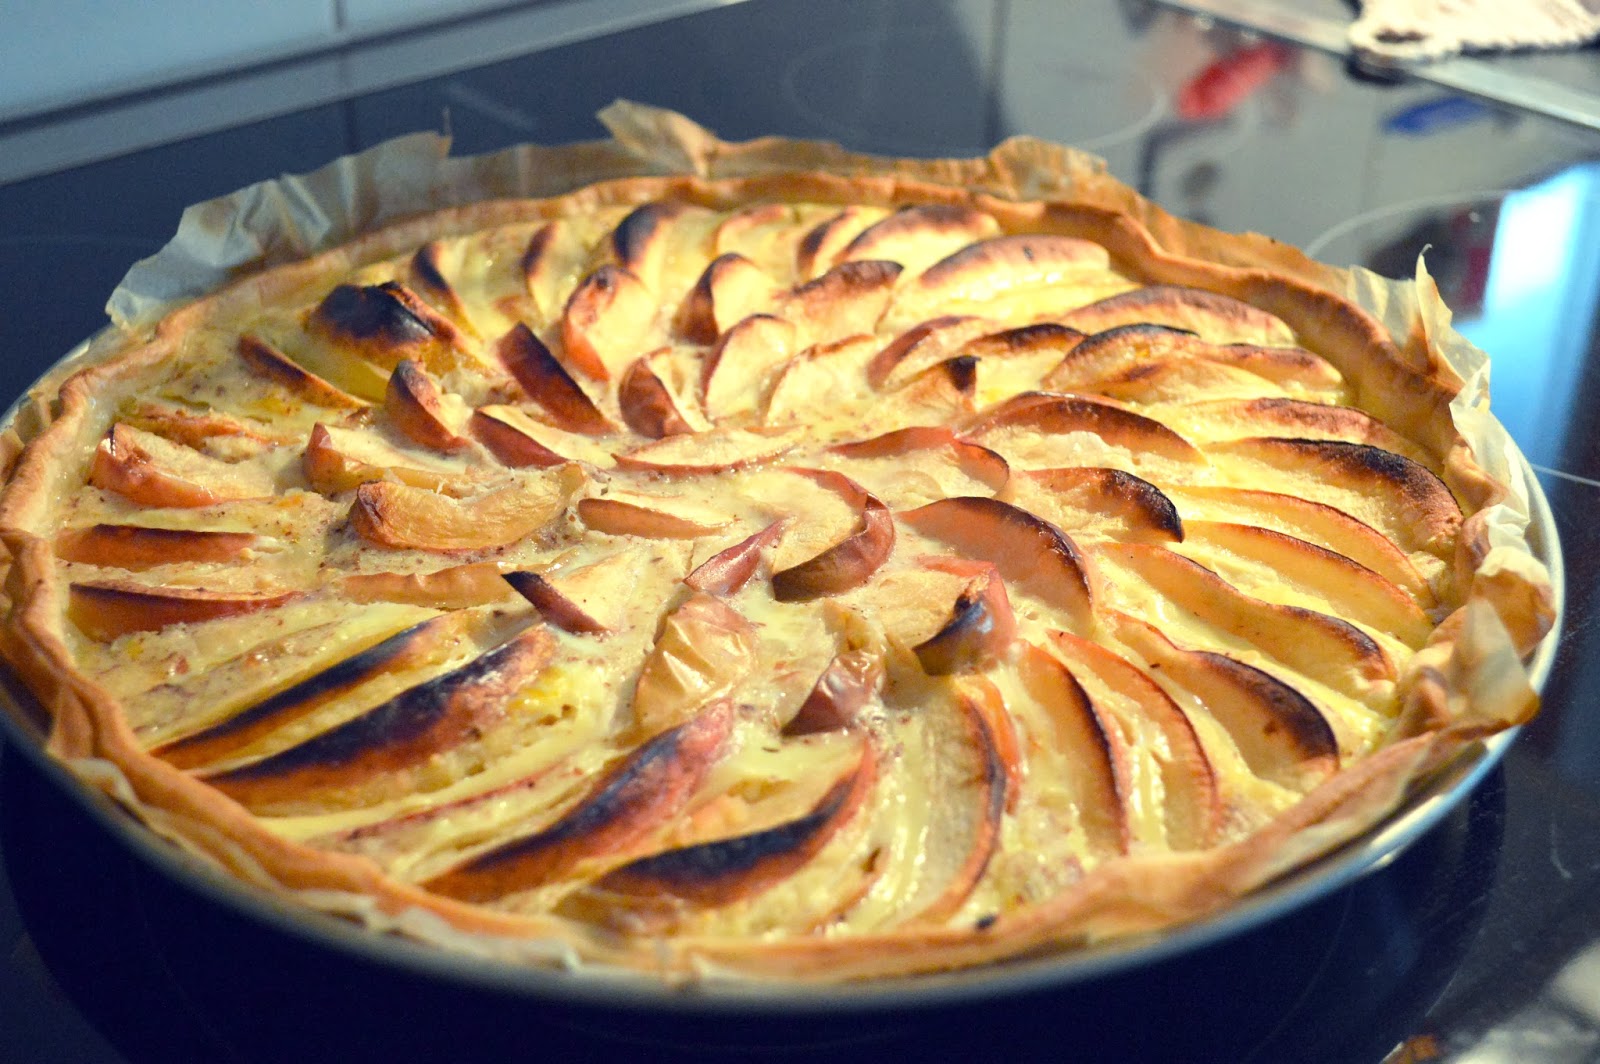 The image show a large round pastry with a lattice top and cut apple slices in a round pattern